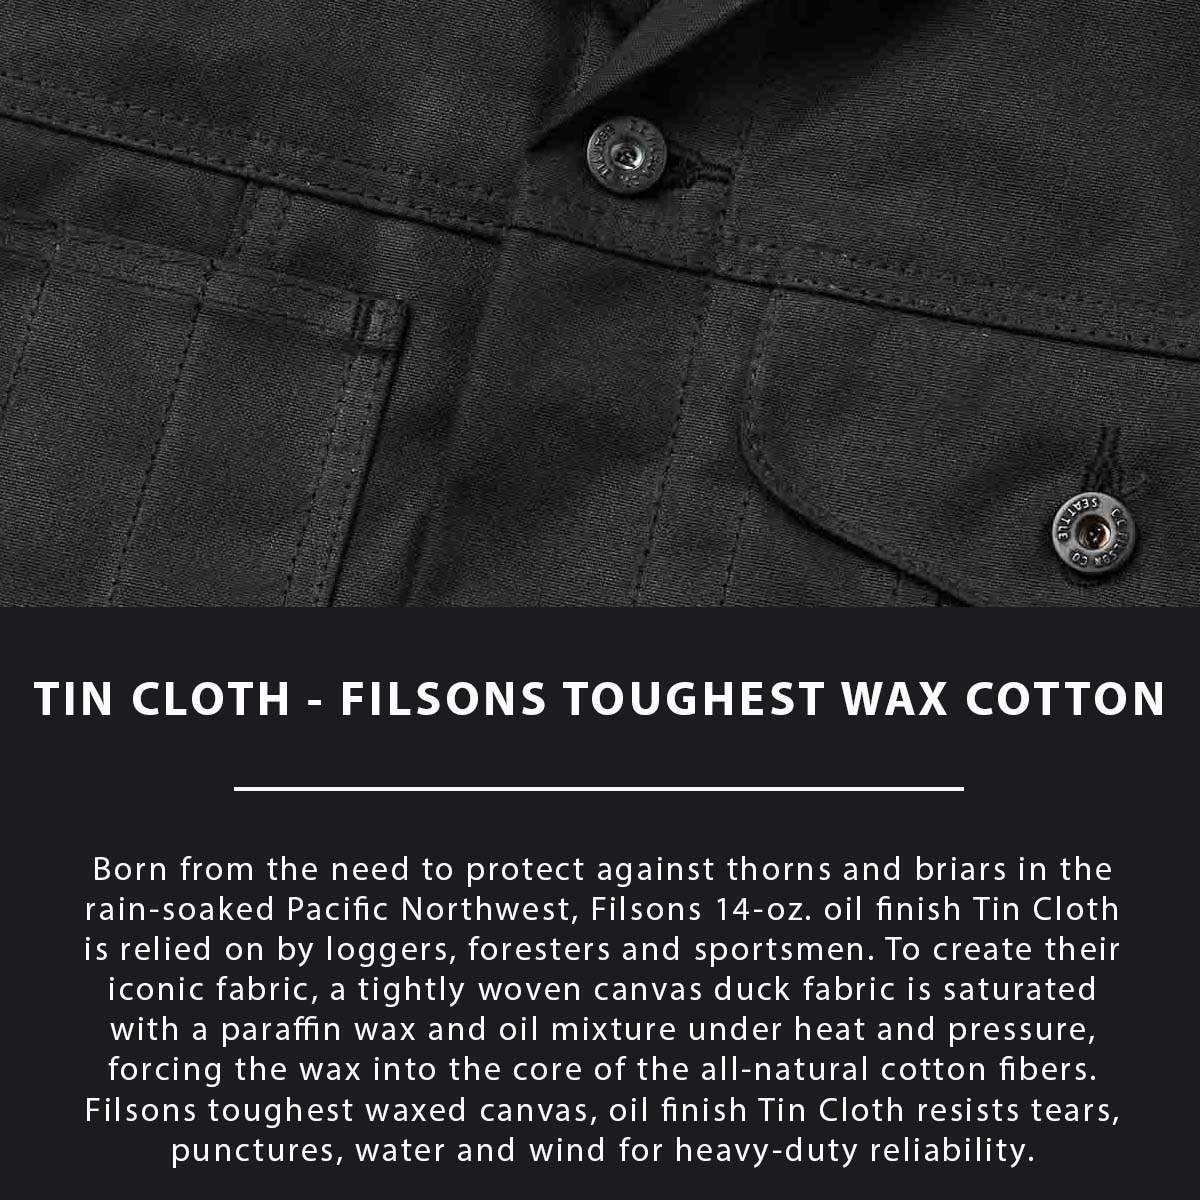 Filson Tin Cloth Short Lined Cruiser Jacket Black, made of the legendary super strong, lightweight, and oil impregnated 14-oz. Tin Cloth canvas